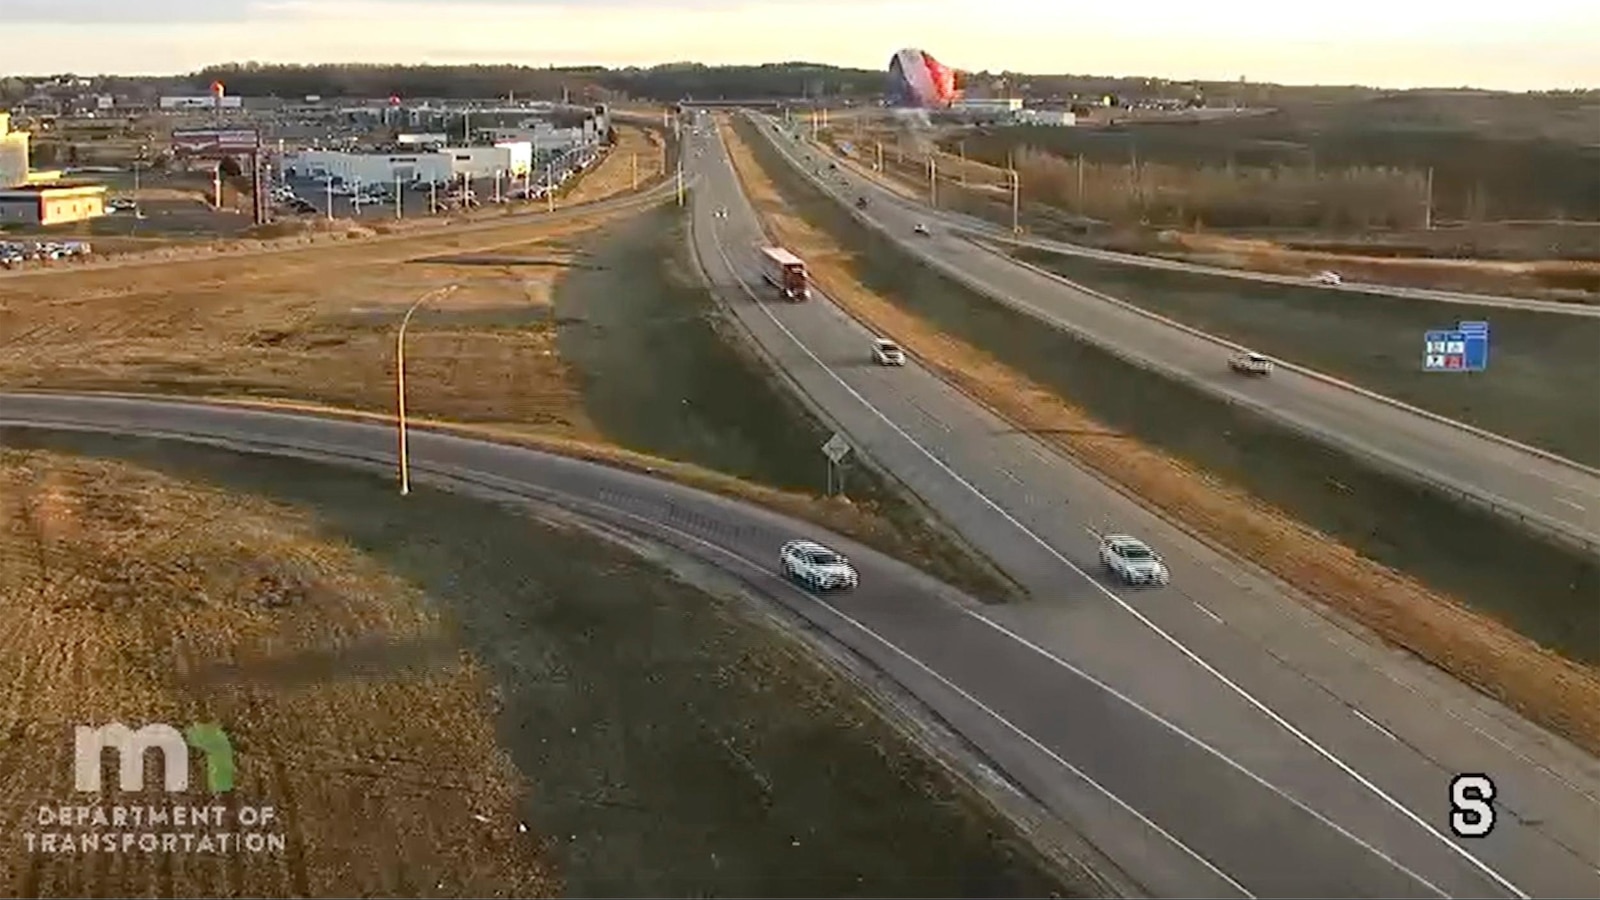 No injuries reported after hot air balloon collides with power line and sparks fire